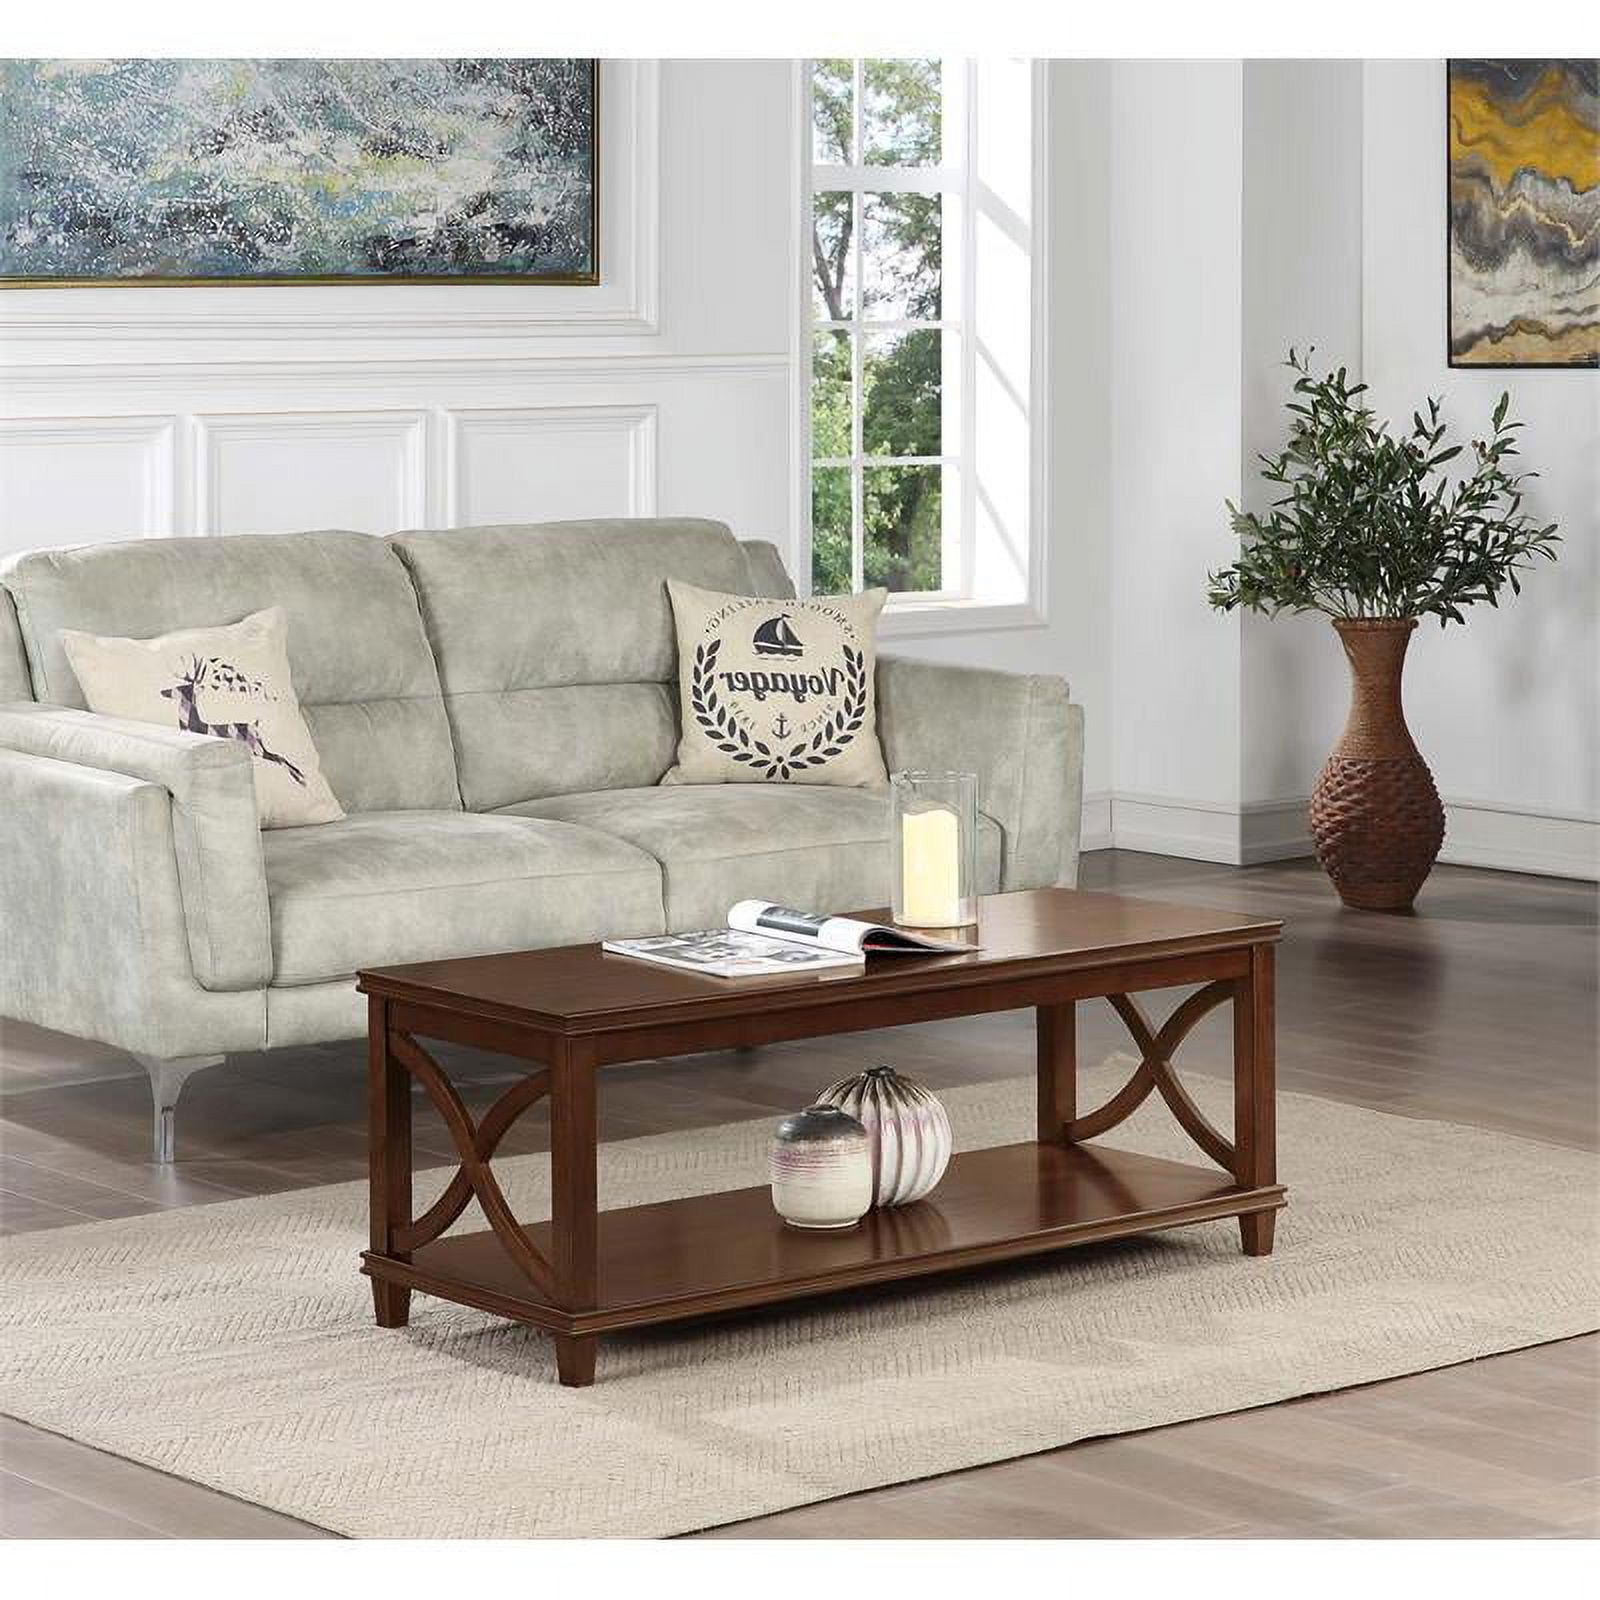 Most Current Espresso Wood Finish Coffee Tables For Pemberly Row Coffee Table In Espresso Wood Finish – Walmart (View 3 of 10)